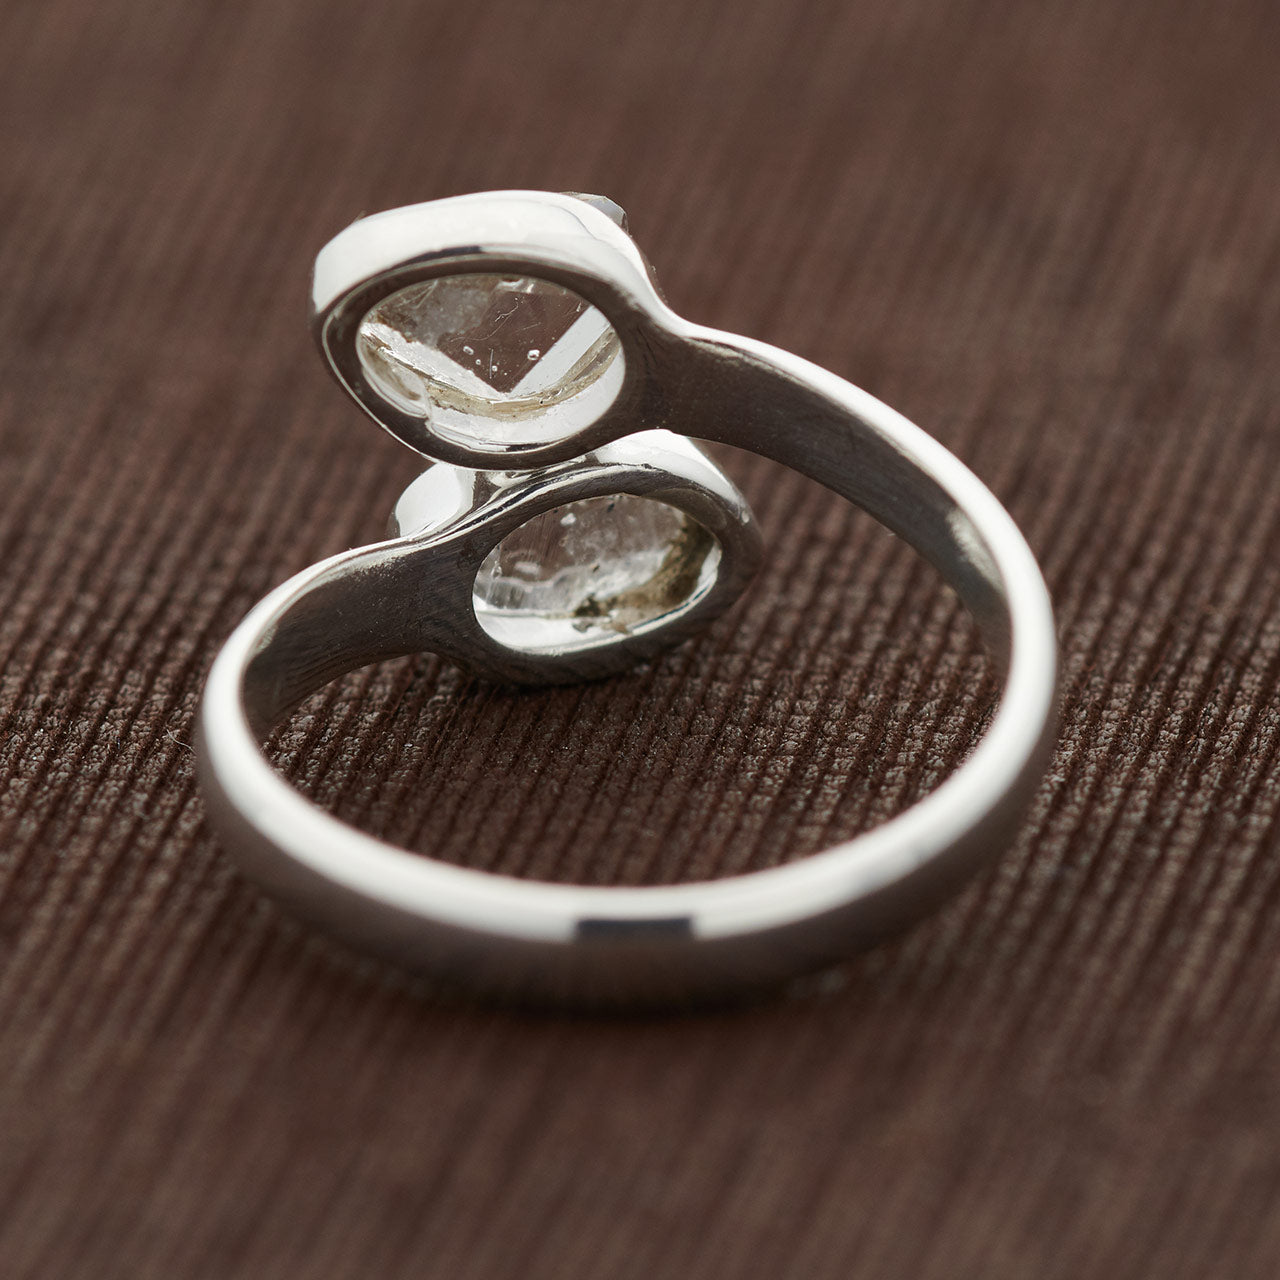 HERKIMER DIAMOND WITH HERKIMER DIAMOND STERLING SILVER RING